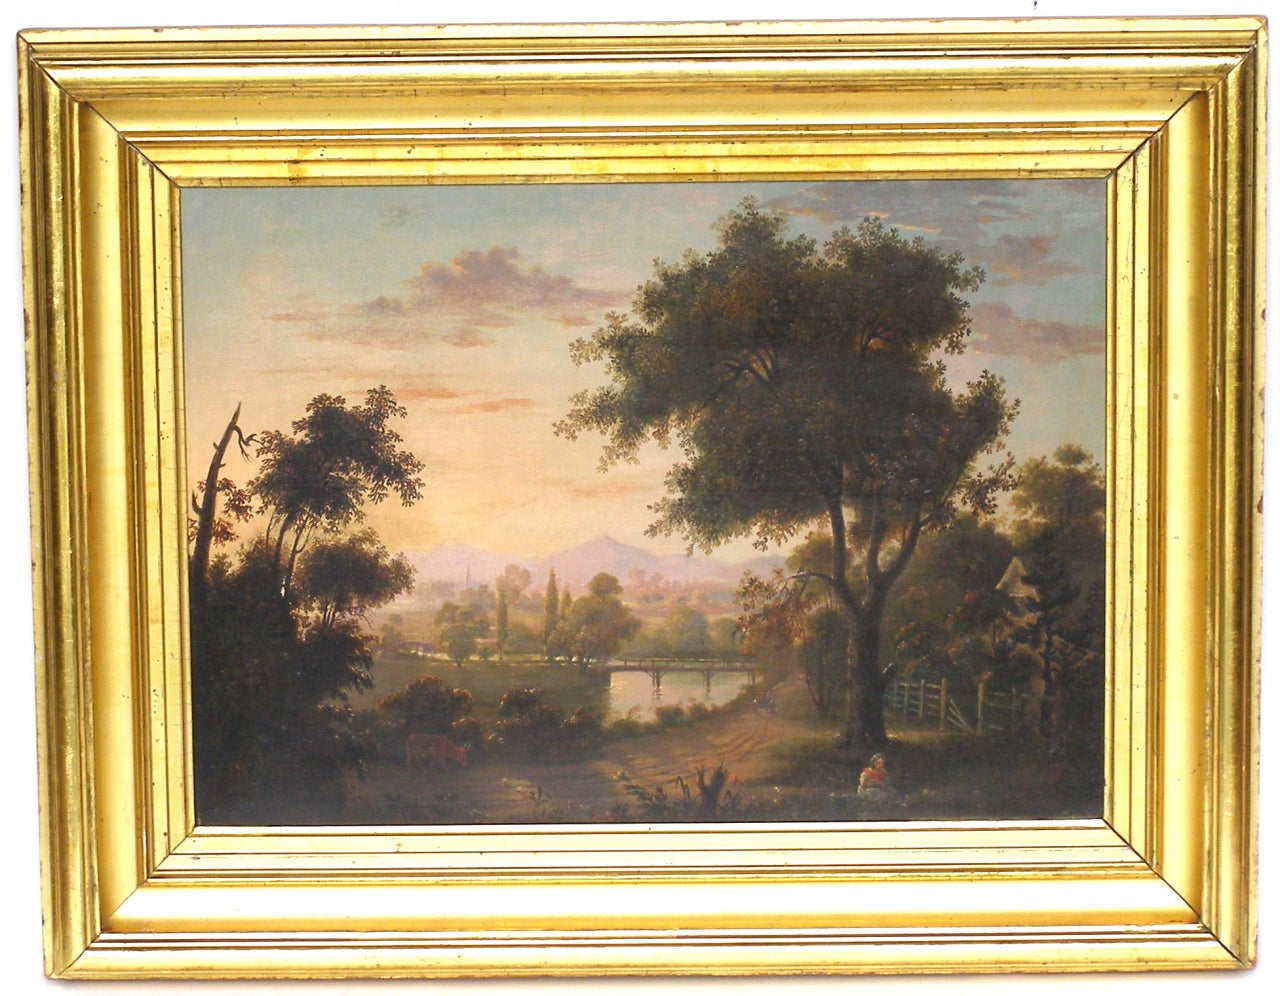 A lovely sunset landscape attributed to Portland, Maine artist Charles Codman (b. 1800, d.1842). Codman's work is represented in several US museums (see artist biography section on my gallery home page) and most recently the Portland Museum of art